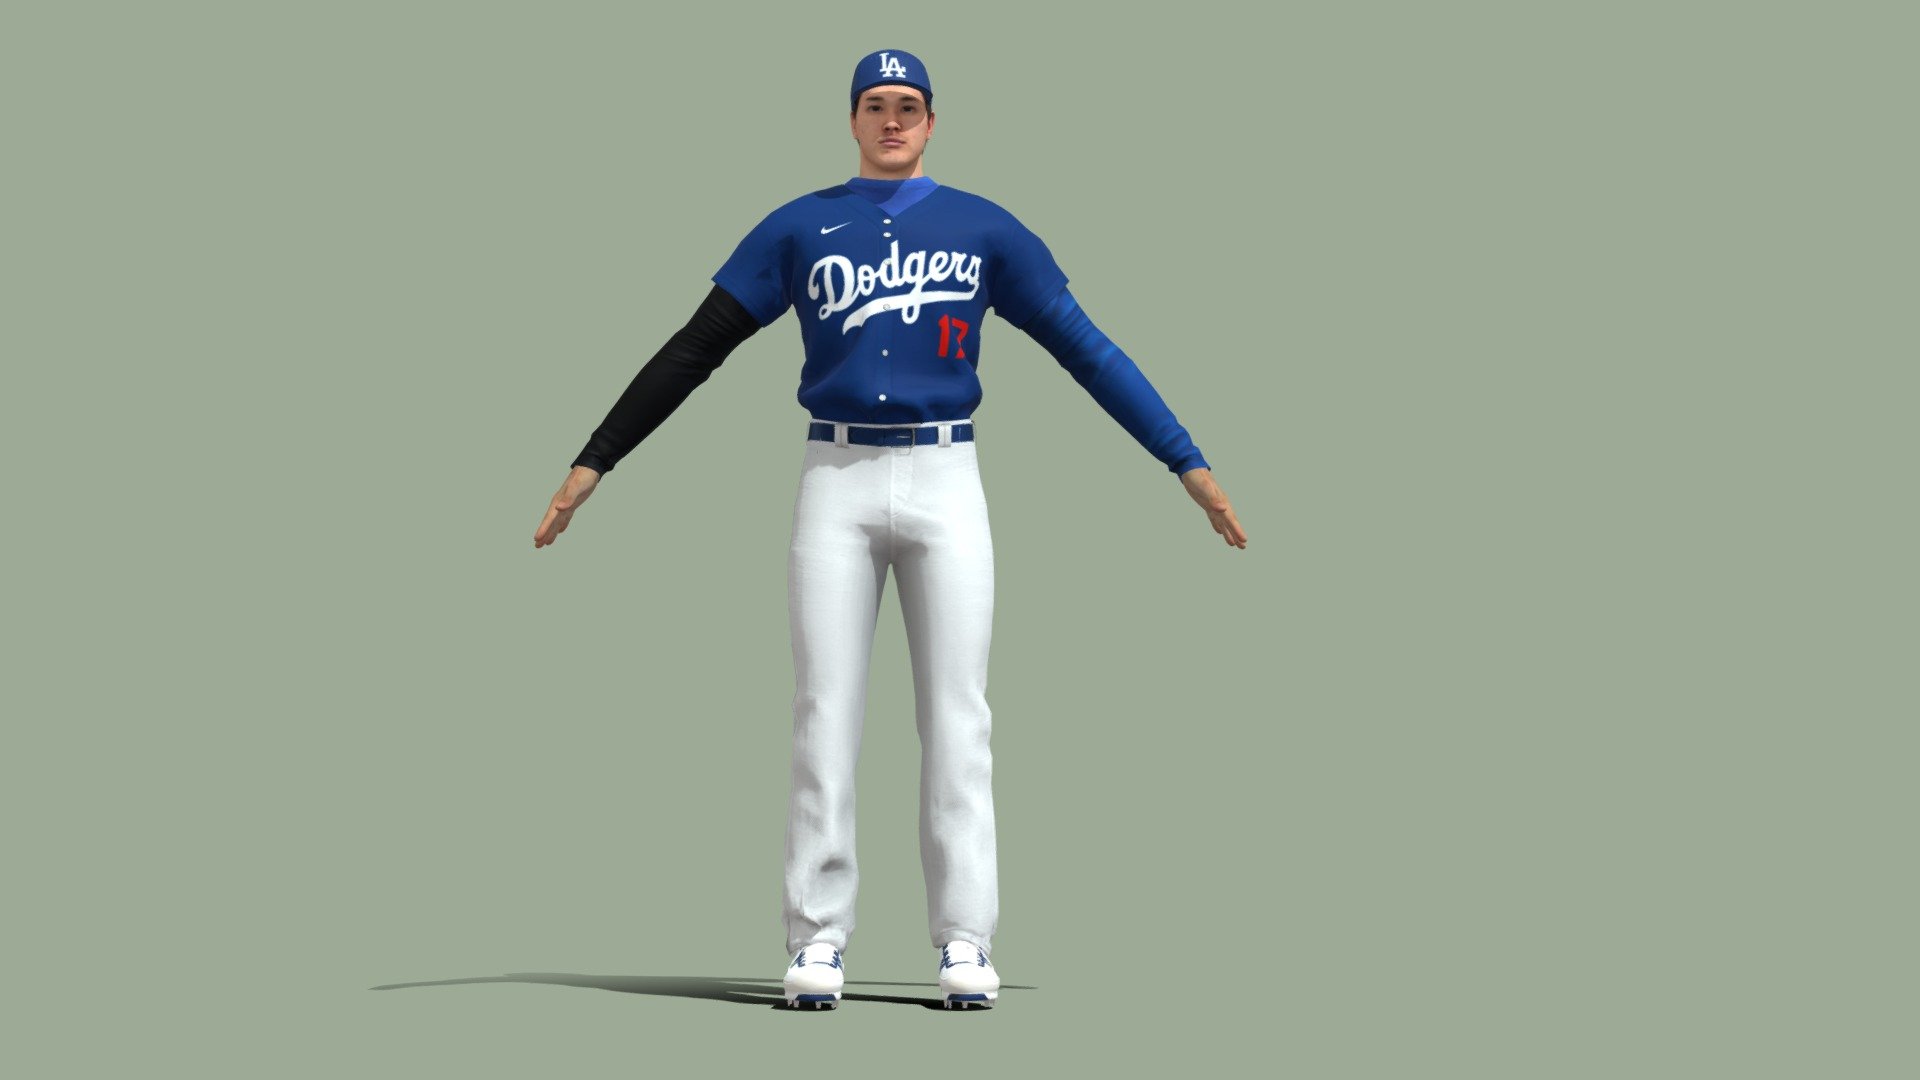 Shohei Ohtani is a Japanese professional baseball pitcher and designated hitter for the Los Angeles Dodgers of Major League Baseball (MLB).


For download:

https://3dpassion.net/product/t-pose-rigged-shohei-ohtani-los-angeles-dodgers/

For contact:

** 3dpassion3d@gmail.com**

telegram: @passion3d
Model’s created by 3dsmax, export to FBX file. 

Very simple to import FBX file into C4D, Blender, Maya, Sketchup…

Format





3DSMax 2020 standard materials




Fbx




Obj




C4D r19




Blender 3.4




Maya 2018




Gltf 2.0




Glb 2.0


 - T-Pose Rigged Shohei Ohtani Los Angeles Dodgers - 3D model by 3dpassion.net (@hieu86coin2) 3d model